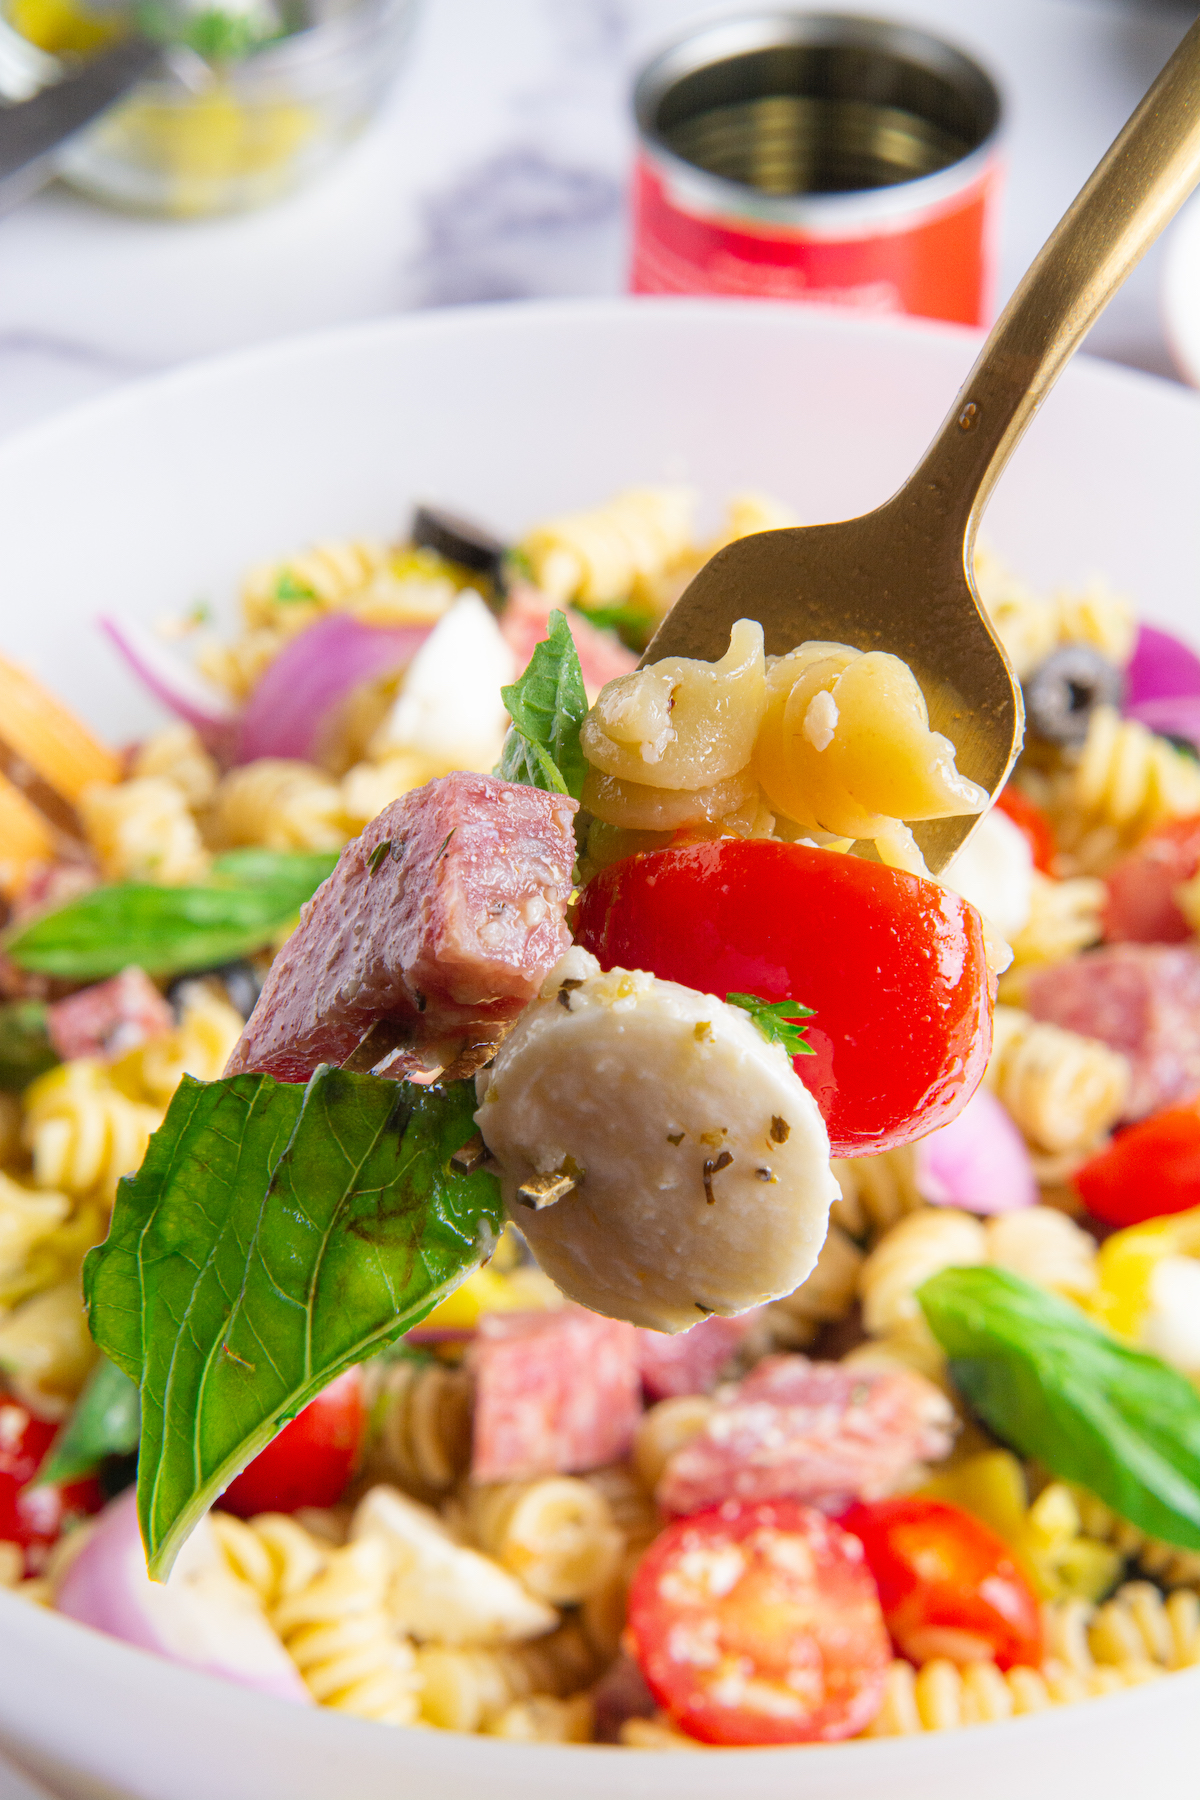 A fork holding cooked rotini pasta, a cherry tomato, dry salami, mozzarella cheese and a basil leaf. The Italian pasta salad can be seen in the background.